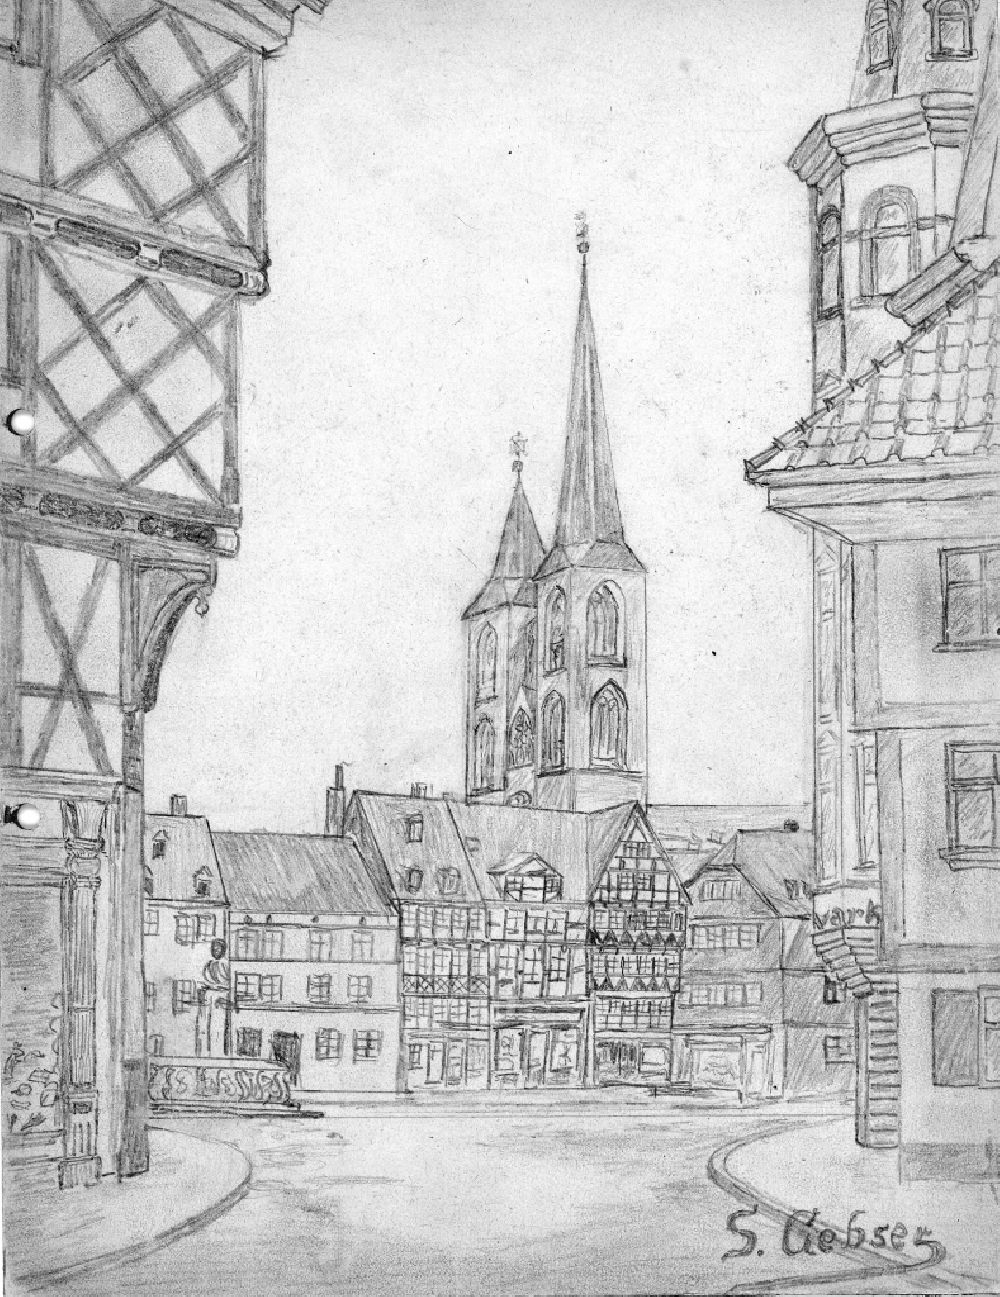 Halberstadt: VG picture free work: pencil drawing Martinikirche am Martiniplan by the artist Siegfried Gebser in Halberstadt in the state Saxony-Anhalt on the territory of the former GDR, German Democratic Republic